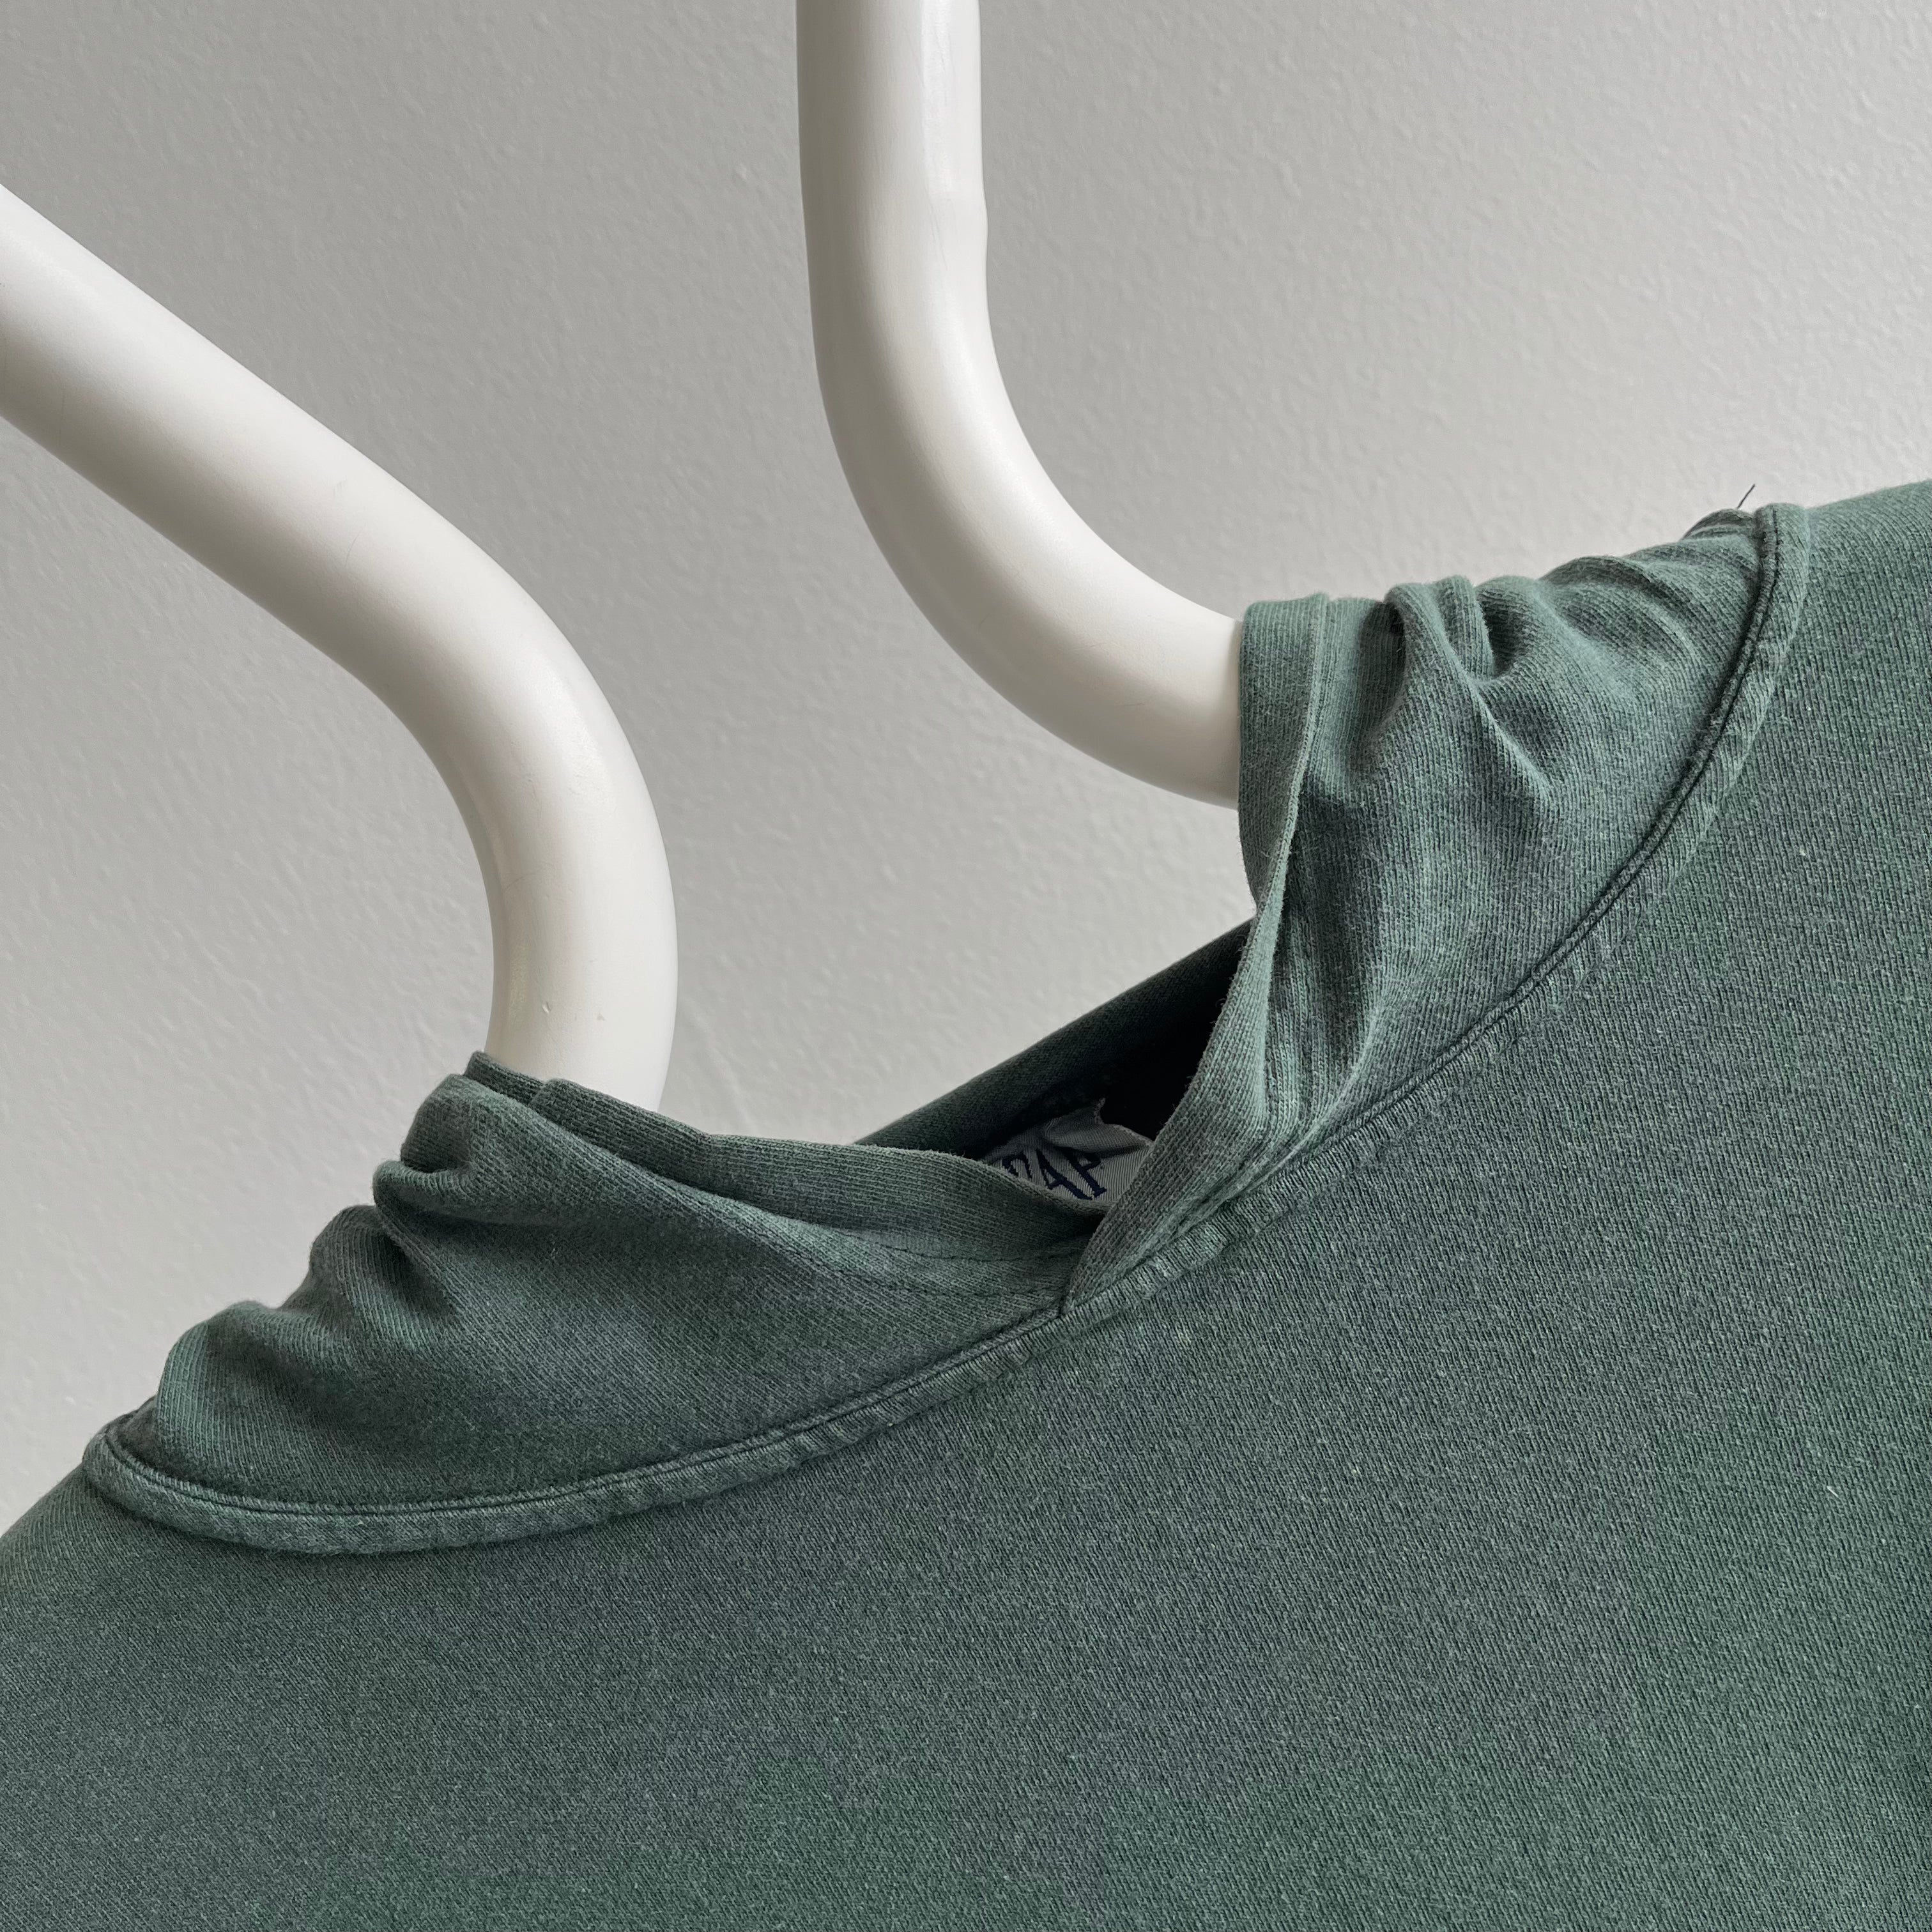 1980s GAP USA Made Blank Forest Green T-Shirt Hoodie with Hole